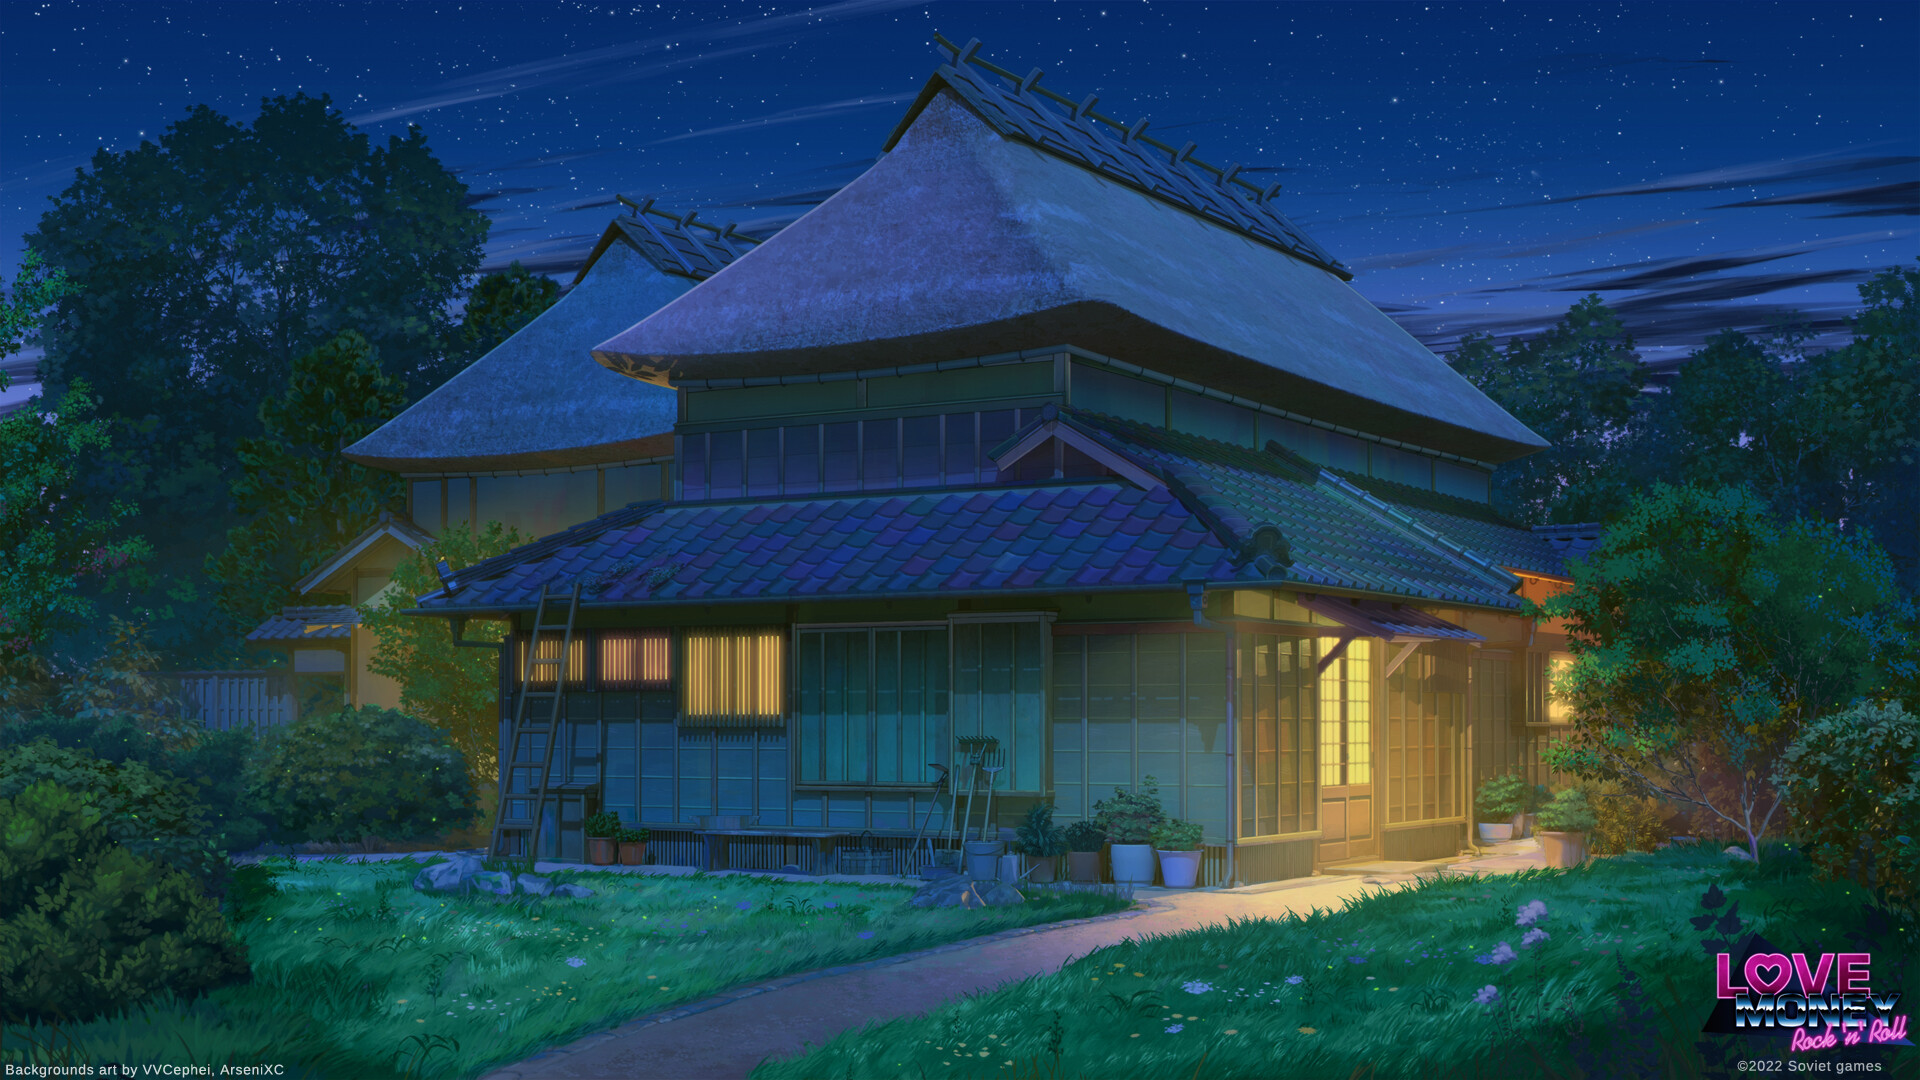 The British Guest House That Inspired a Japanese Anime